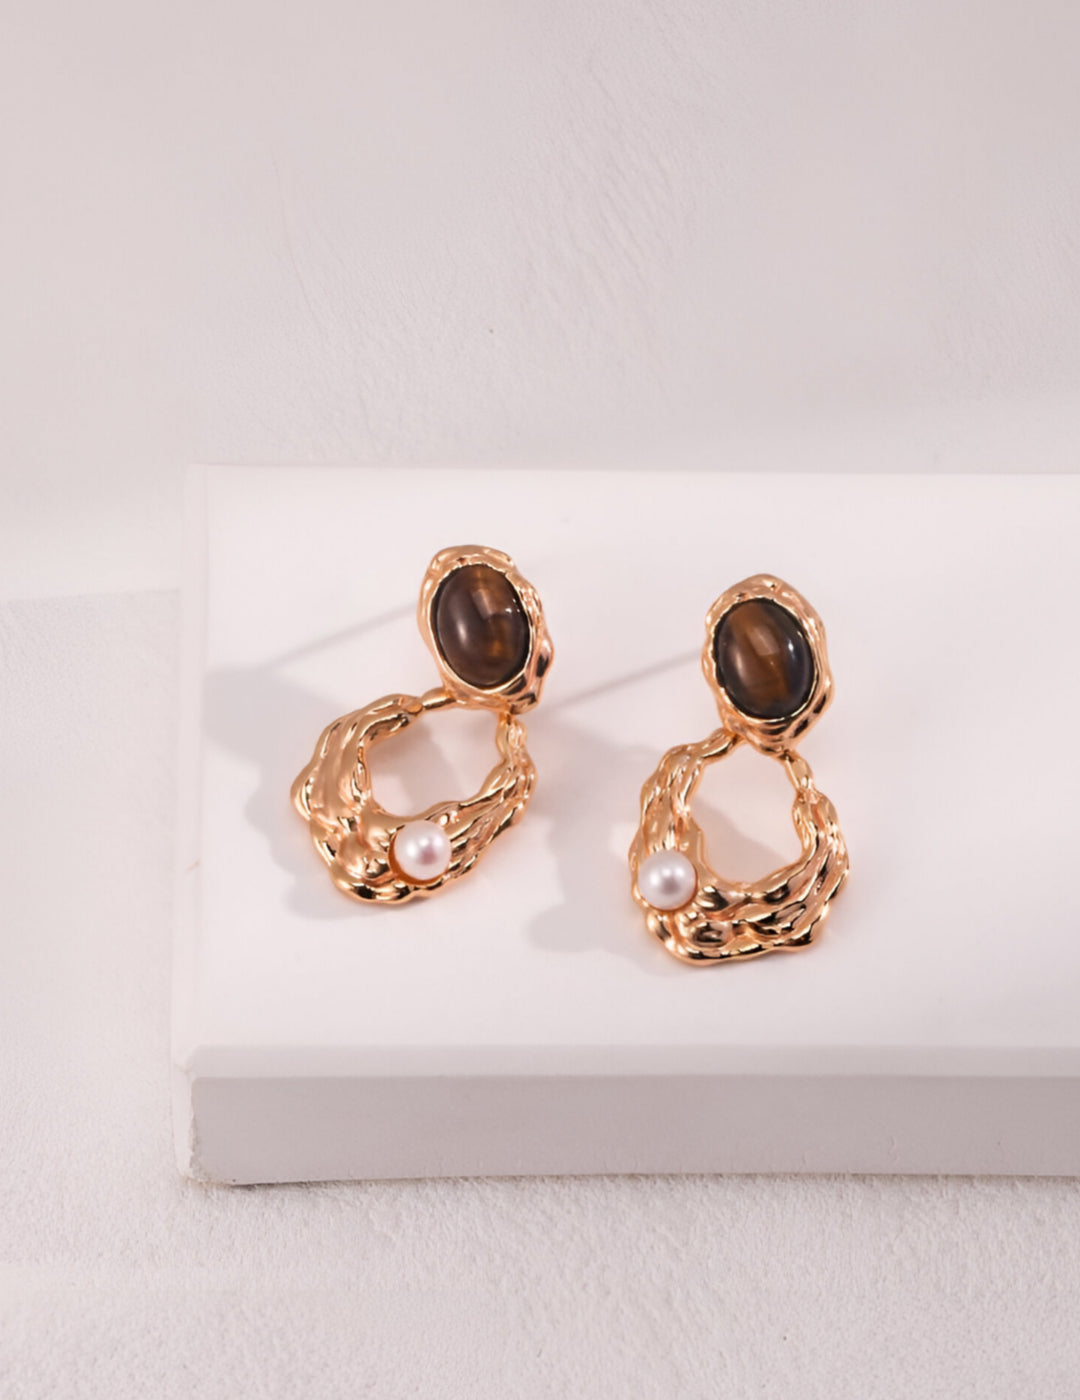 Luxe Earrings  - S925 sterling pure silver - 18K Gold Vermeil-   Pearl Luminance - adorned with majestic Tiger's Eye gemstones that capture every gaze - Elevate your style with a touch of exotic allure. Embrace beauty and confidence, effortlessly